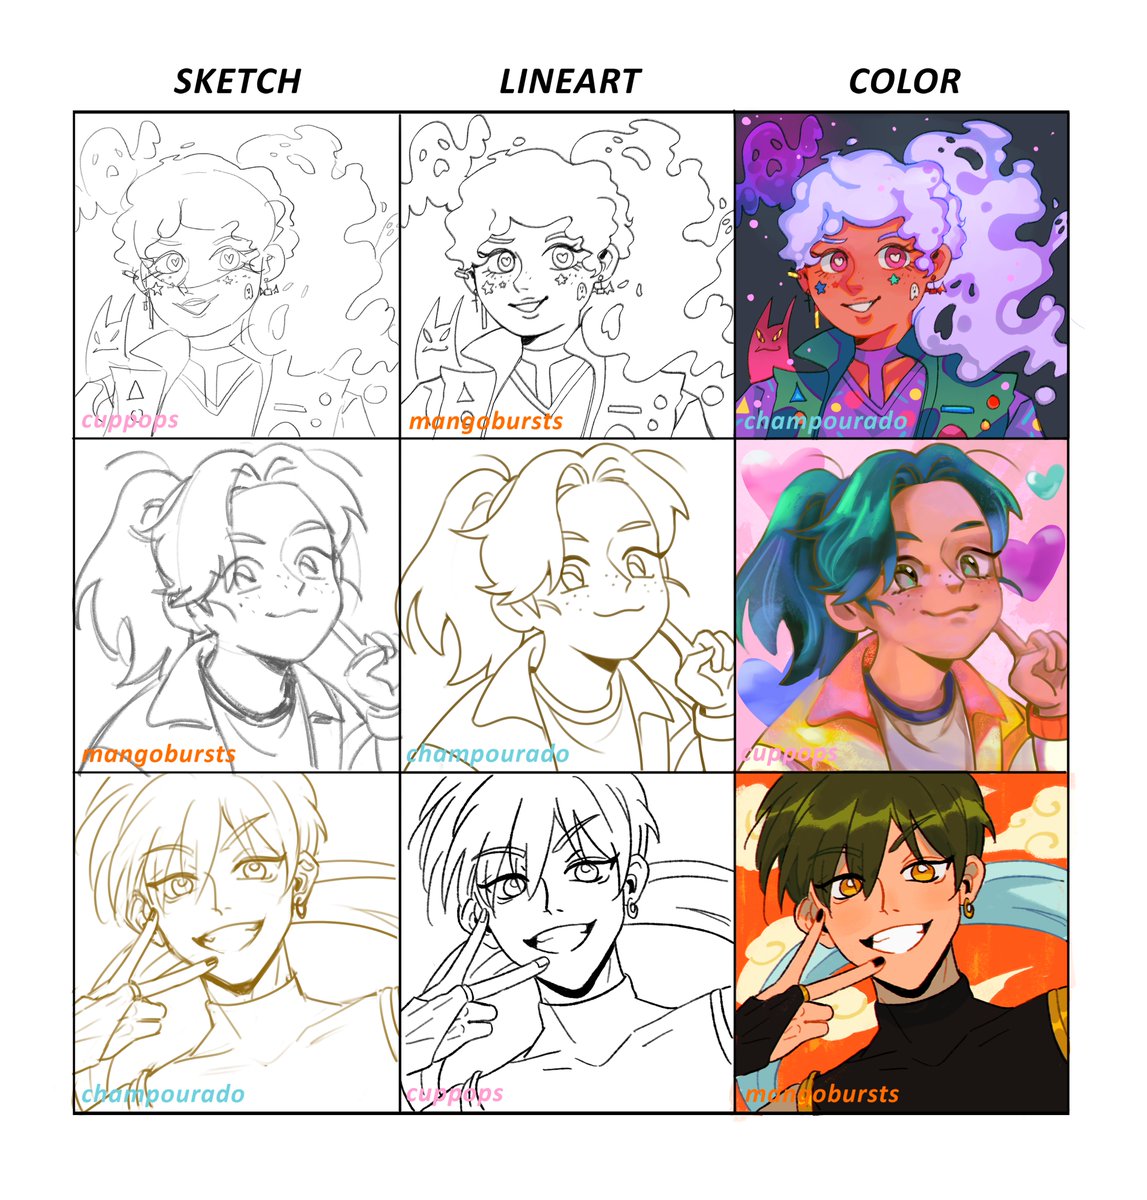 did the switch around meme with siblings @champourado & @cuppops_ ☺️💖 